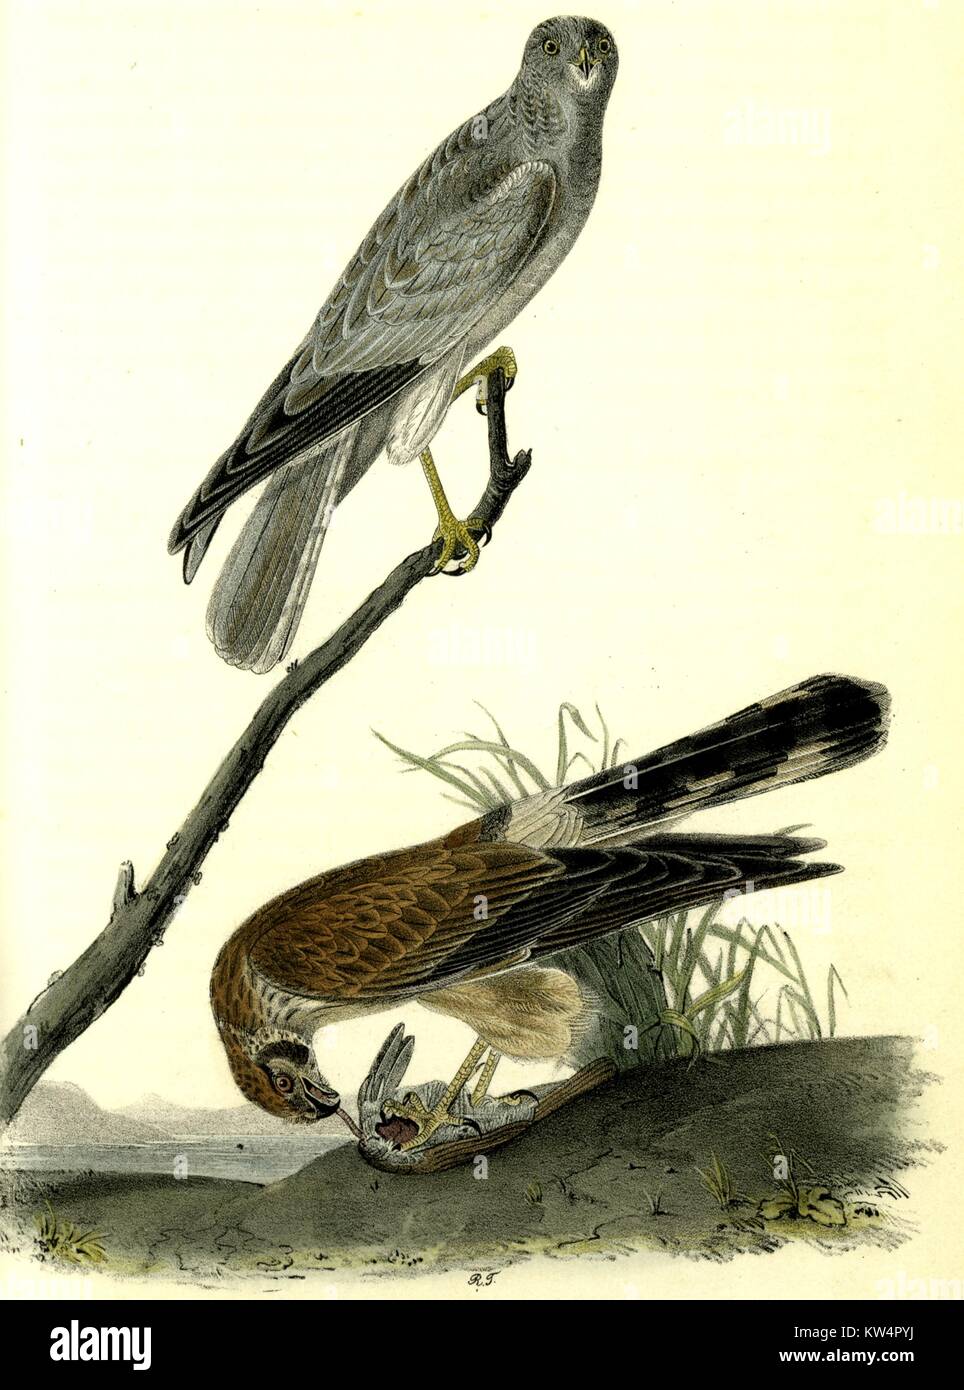 Illustration of the Common Harrier, from the book Birds of America by John James Audubon, 1842. From the New York Public Library. Stock Photo